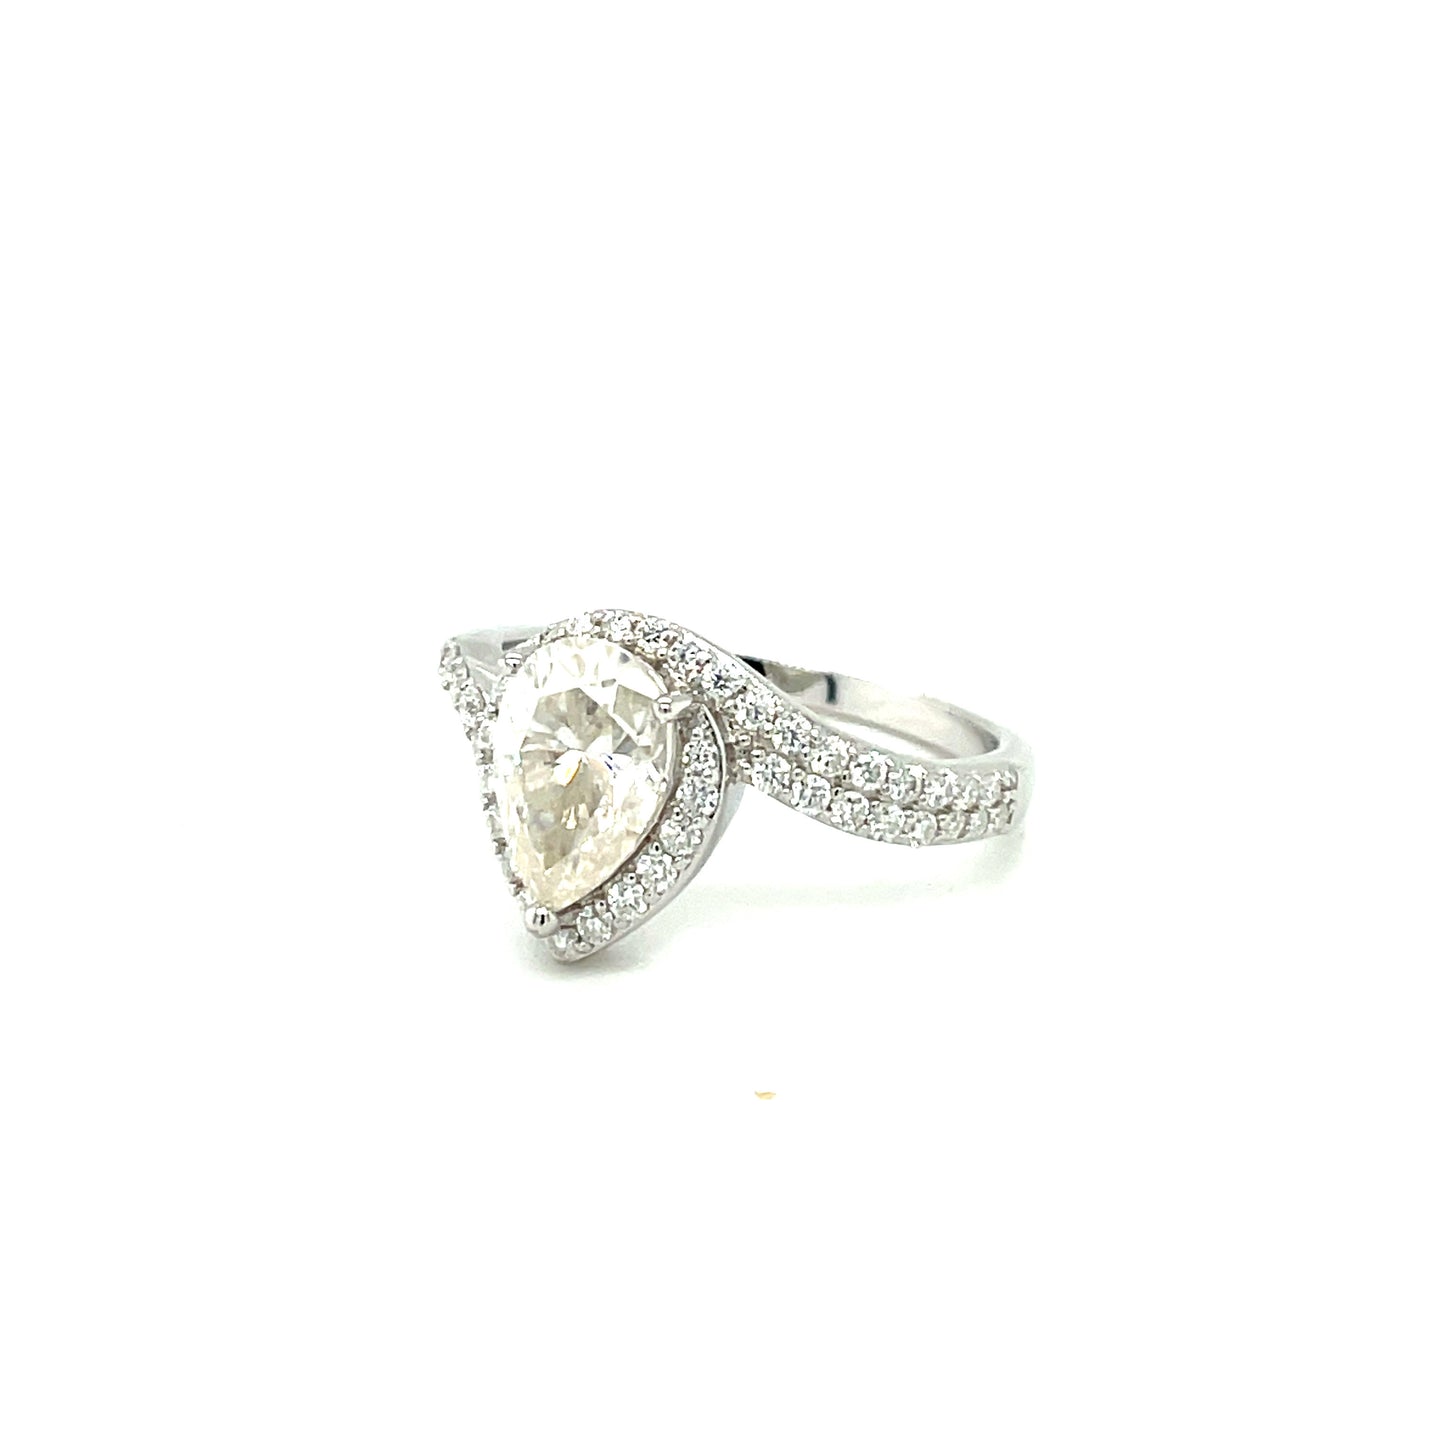 Through Thick & Thin Platinum Plated, Sterling Silver Ring w/2 Ct Pear Shaped Center & Full Moissanite Gemstones Highlights.